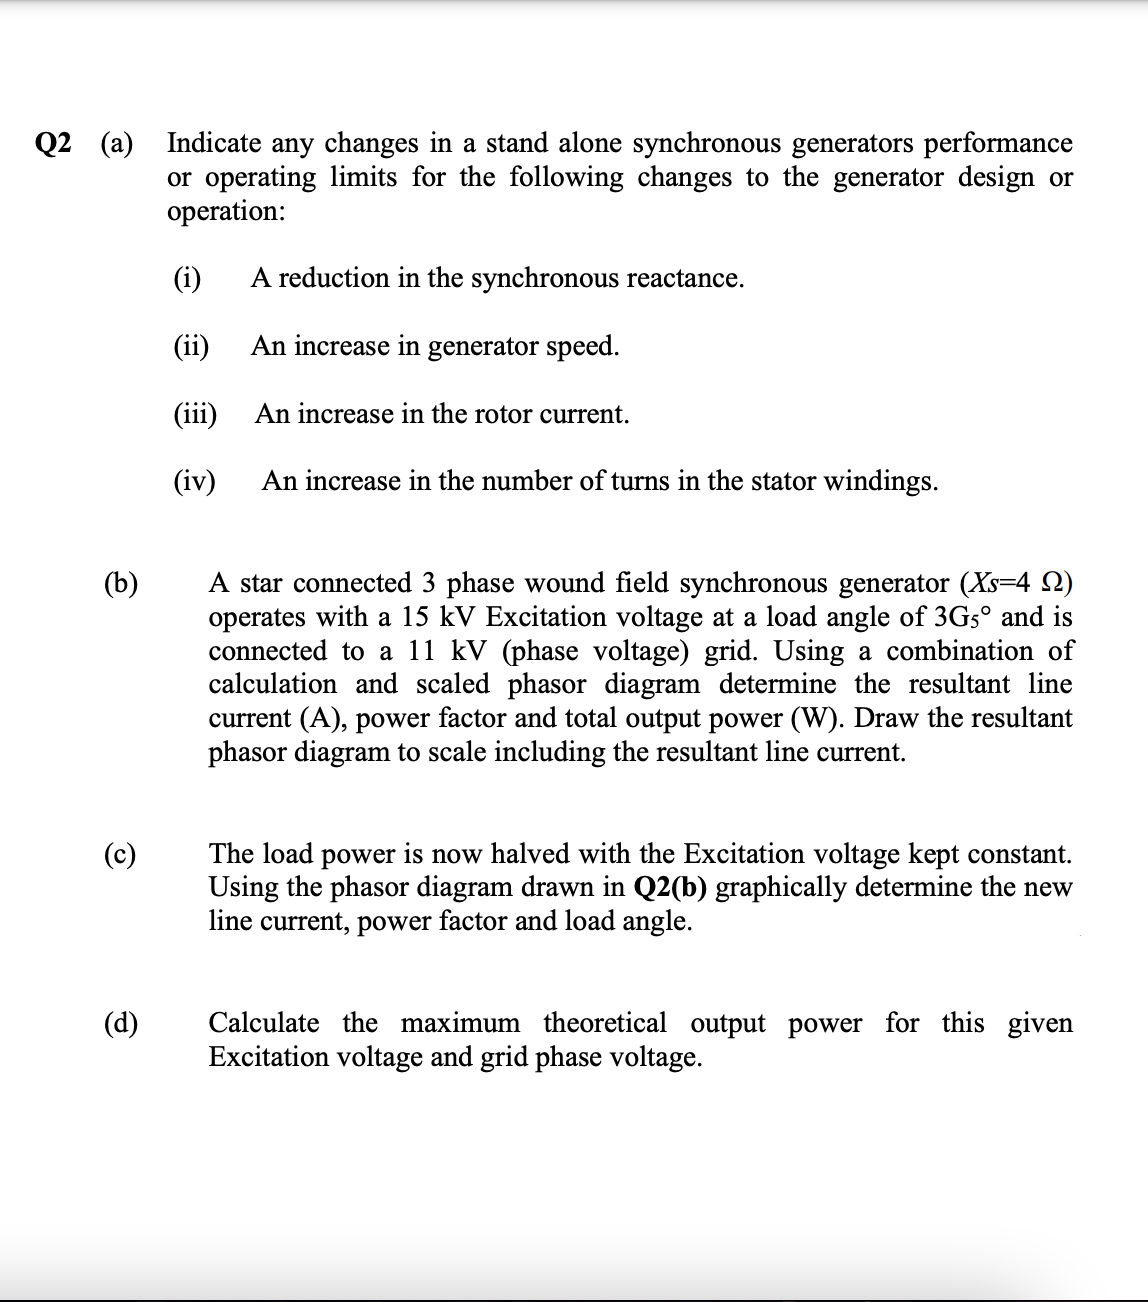 Q2 (a) Indicate any changes in a stand alone synchronous generators performance
or operating limits for the following changes to the generator design or
operation:
(i)
A reduction in the synchronous reactance.
(ii)
An increase in generator speed.
(iii)
An increase in the rotor current.
(iv)
An increase in the number of turns in the stator windings.
A star connected 3 phase wound field synchronous generator (Xs=4 Q)
operates with a 15 kV Excitation voltage at a load angle of 3G5° and is
connected to a 11 kV (phase voltage) grid. Using a combination of
calculation and scaled phasor diagram determine the resultant line
current (A), power factor and total output power (W). Draw the resultant
phasor diagram to scale including the resultant line current.
(b)
(c)
The load power is now halved with the Excitation voltage kept constant.
Using the phasor diagram drawn in Q2(b) graphically determine the new
line current, power factor and load angle.
Calculate the maximum theoretical output power for this given
Excitation voltage and grid phase voltage.
(d)
